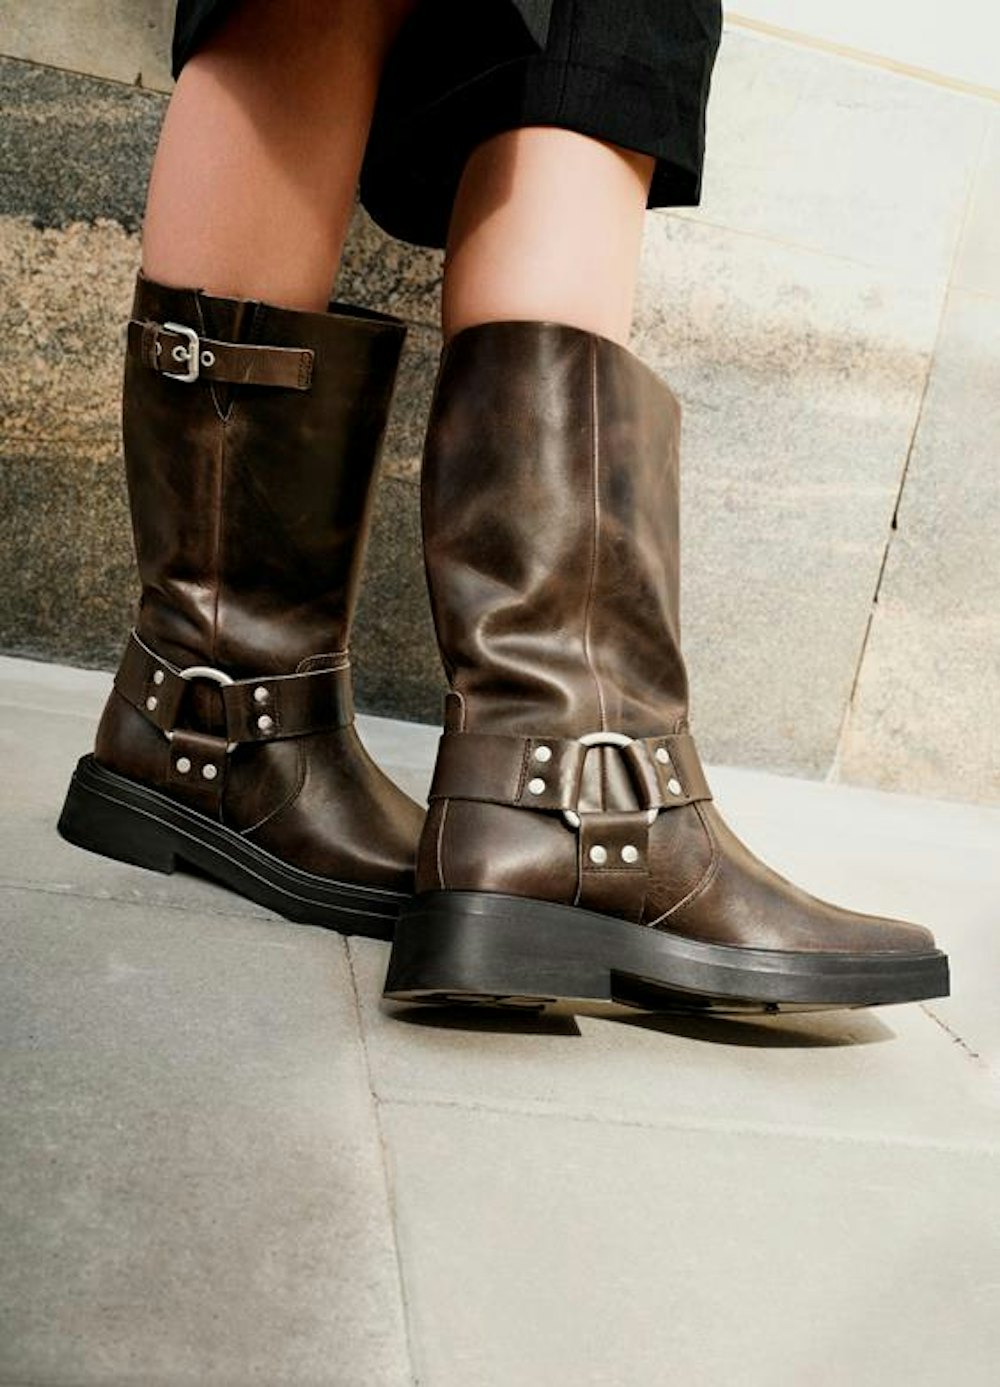 shampoo kulhydrat banner 13 Moto Boots to Help You Go Grunge This Fall